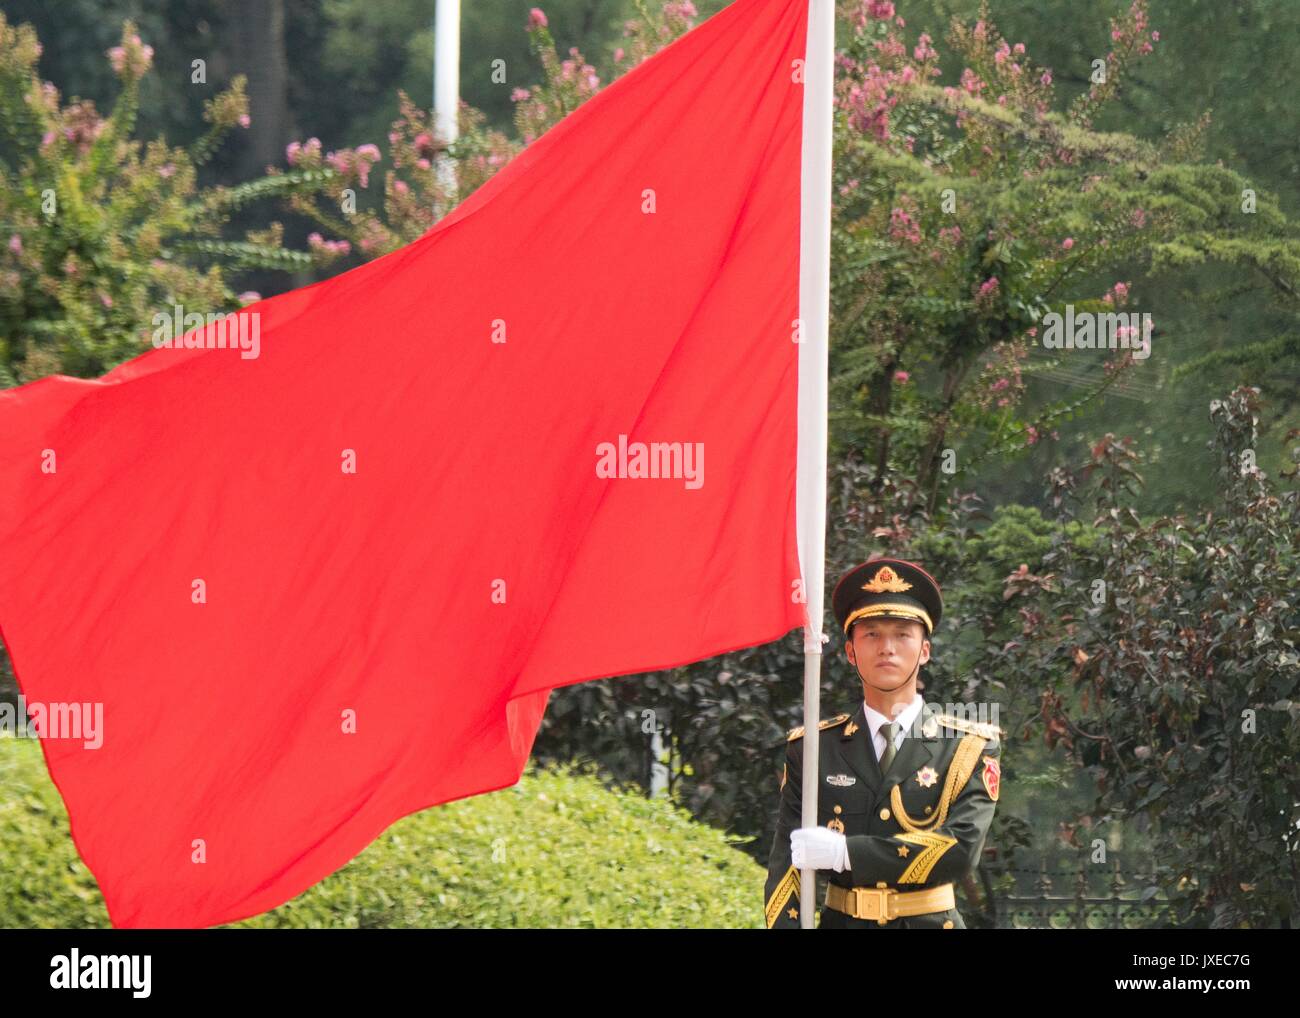 Beijing, China. 15th Aug, 2017. Chinese People's Liberation Army honor guard hold a red flag during a the arrival ceremony for U.S. Chairman of the Joint Chiefs Gen. Joseph Dunford at the Bayi building August 15, 2017 in Beijing, China. Dunford is in Beijing to strengthen communication between the two militaries amid tensions concerning North Korea. Credit: Planetpix/Alamy Live News Stock Photo